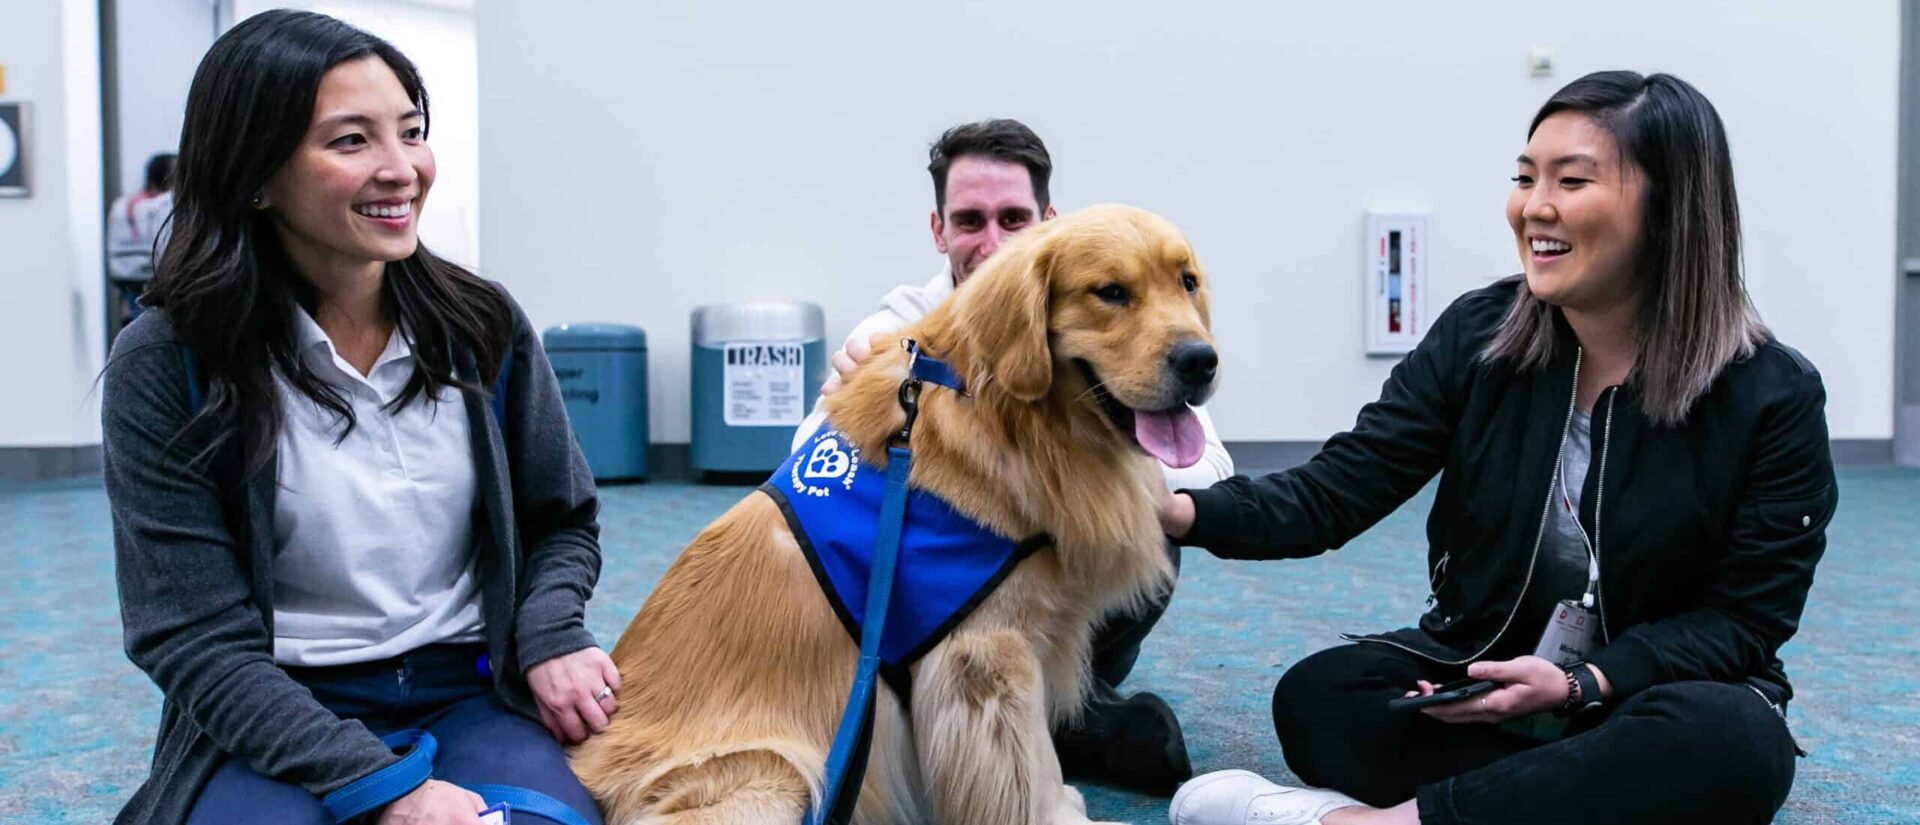 Two women and one man sit around a golden retriever service dog.